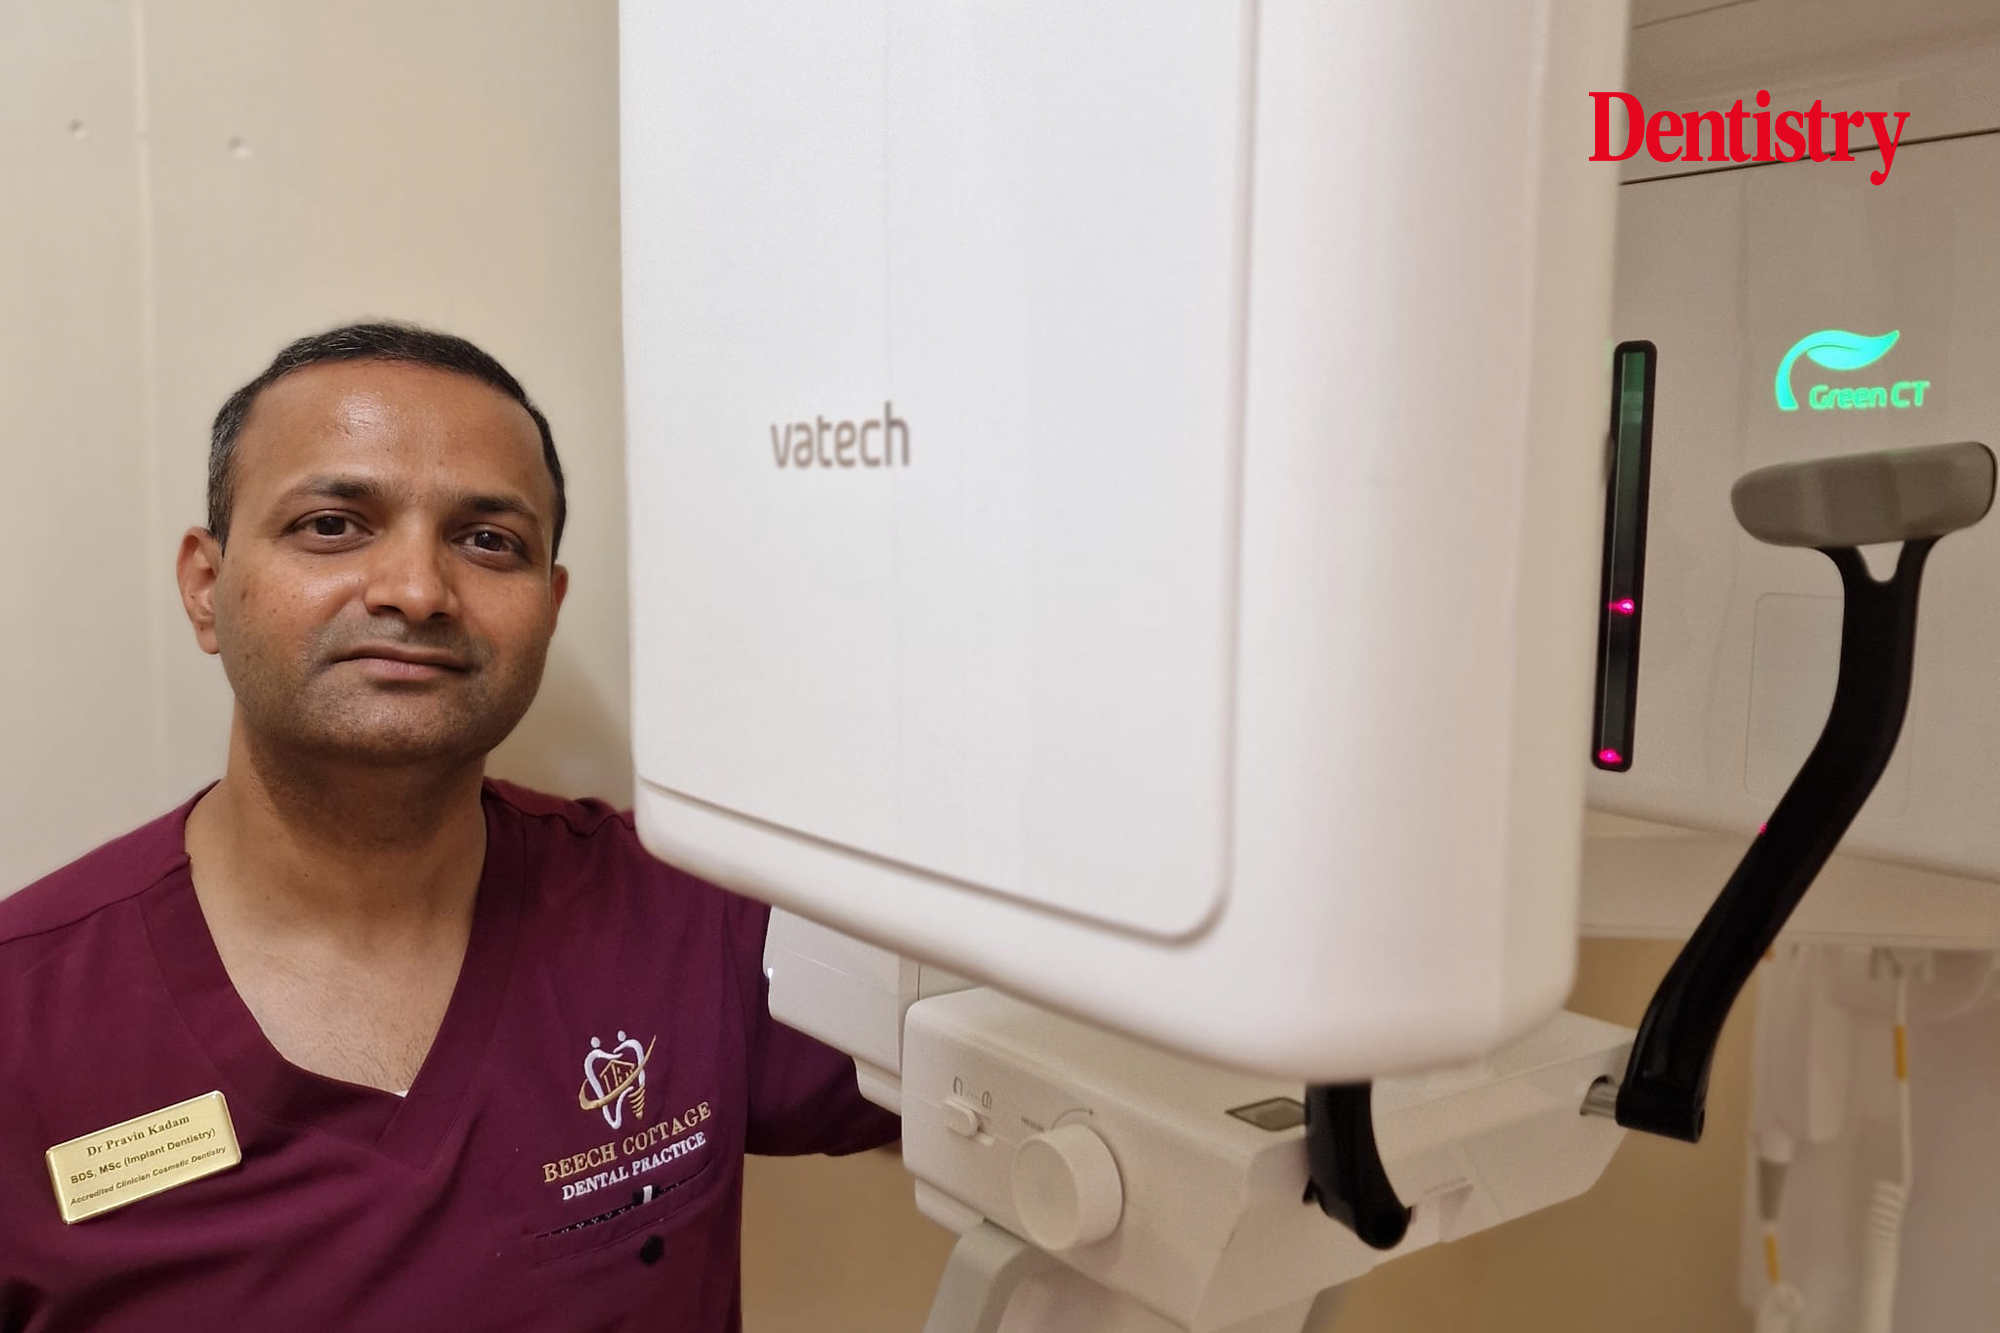 Pravin Kadam discusses his experience with a Vatech CBCT machine